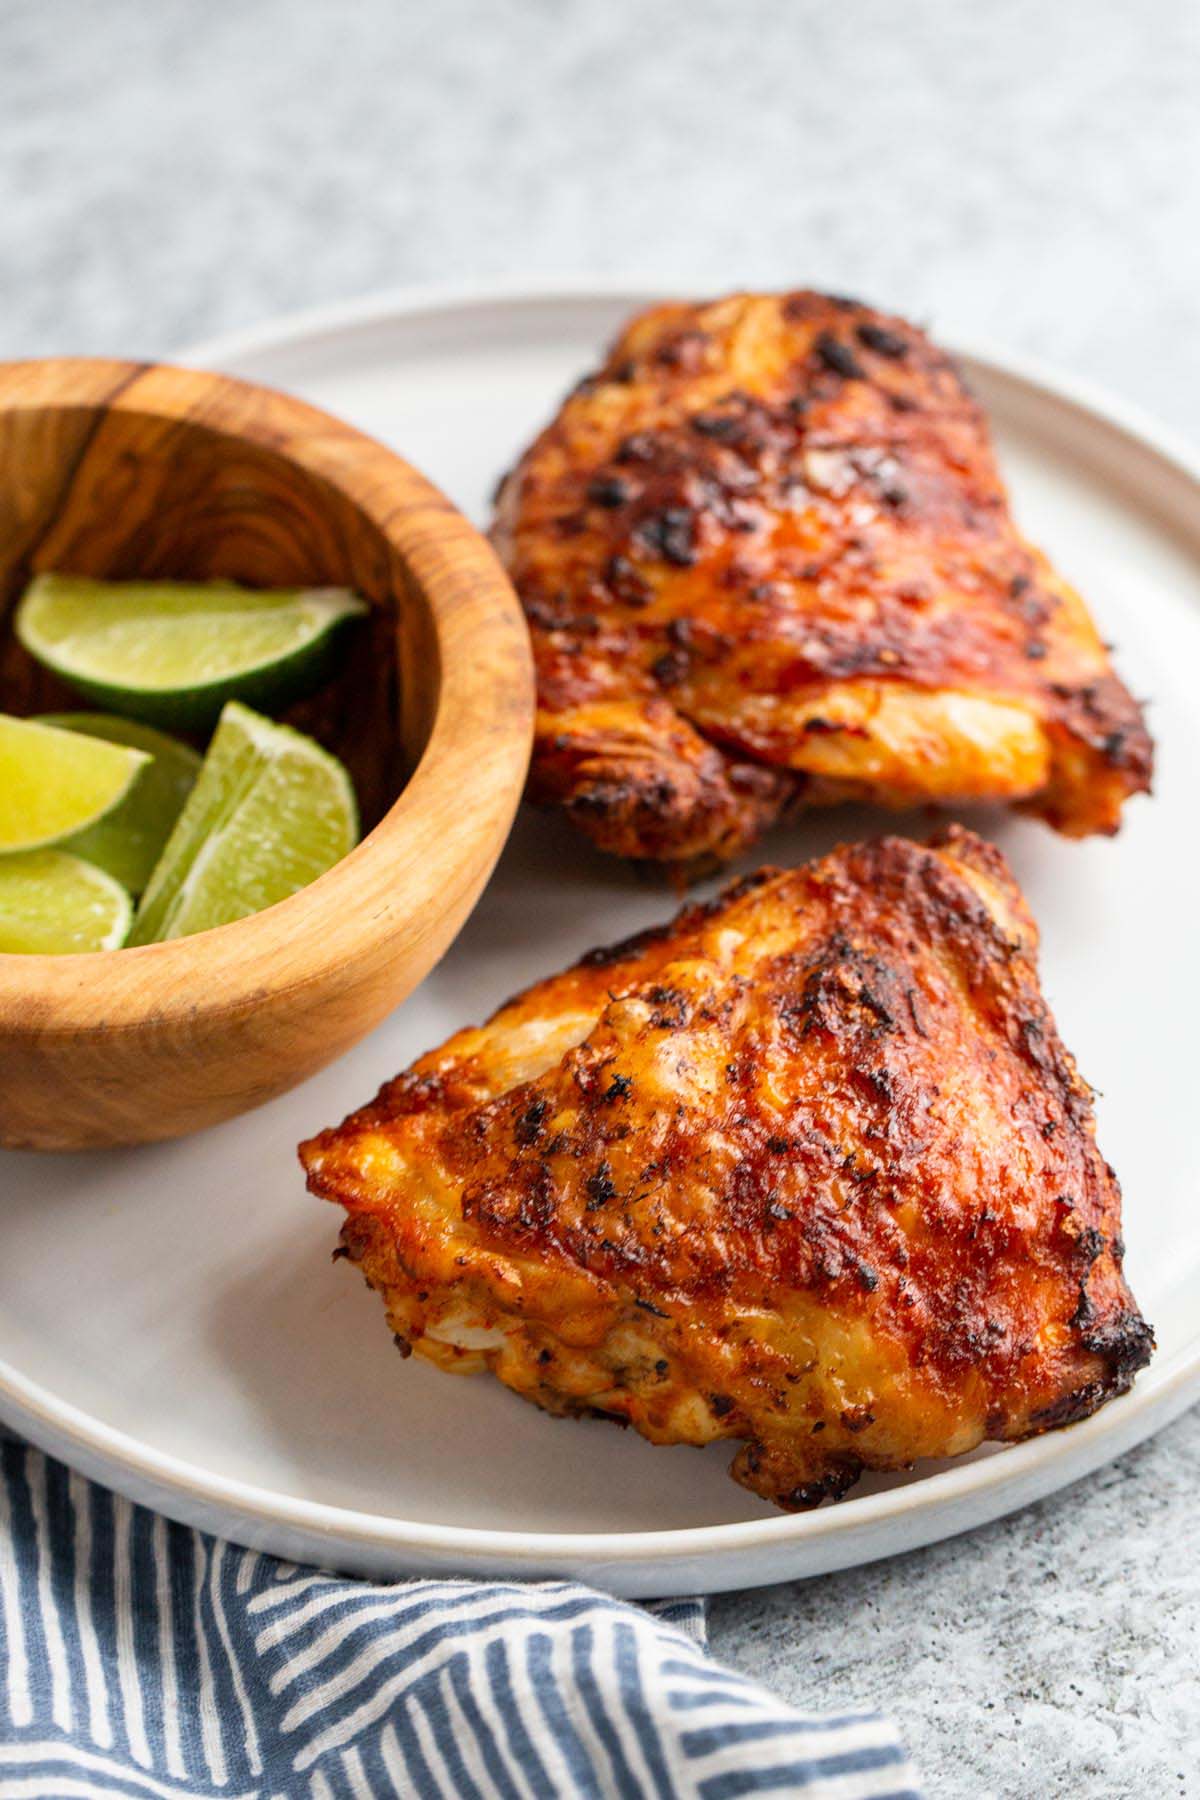 Peri peri chicken thighs on a white plate with limes on the side.